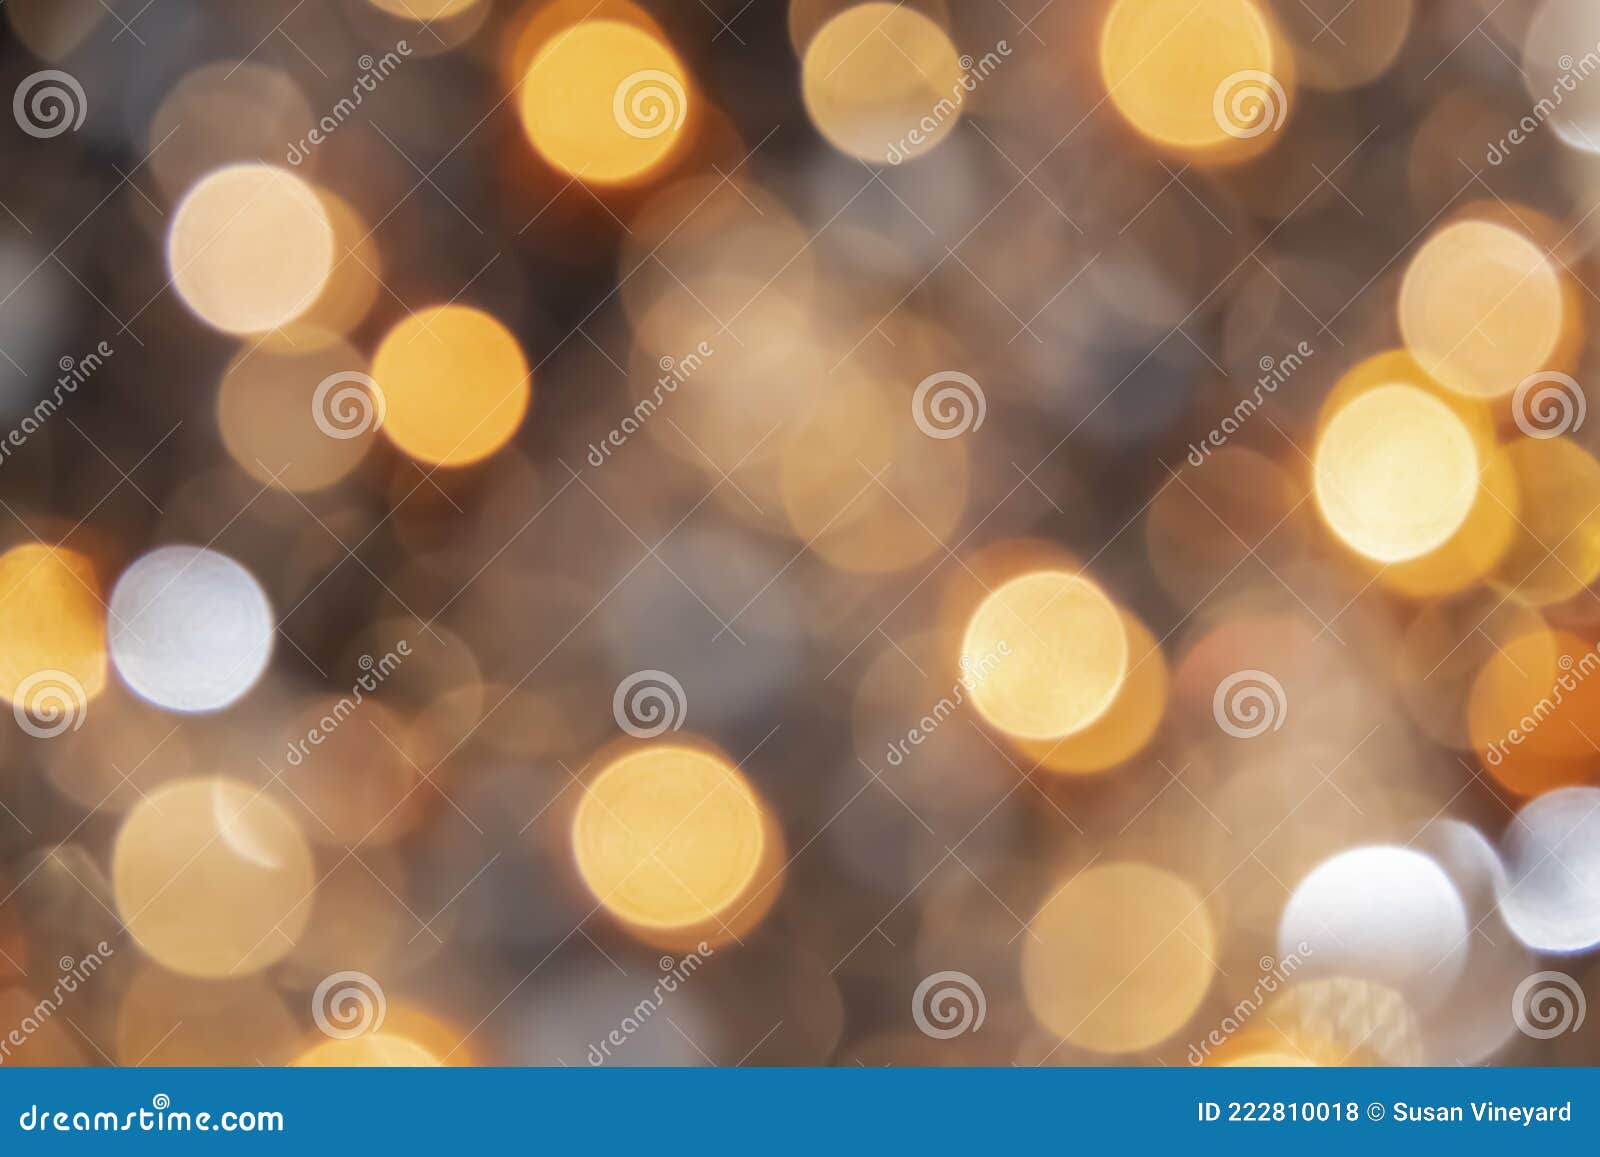 spooky smokey bokeh background in golds and oranges and browns